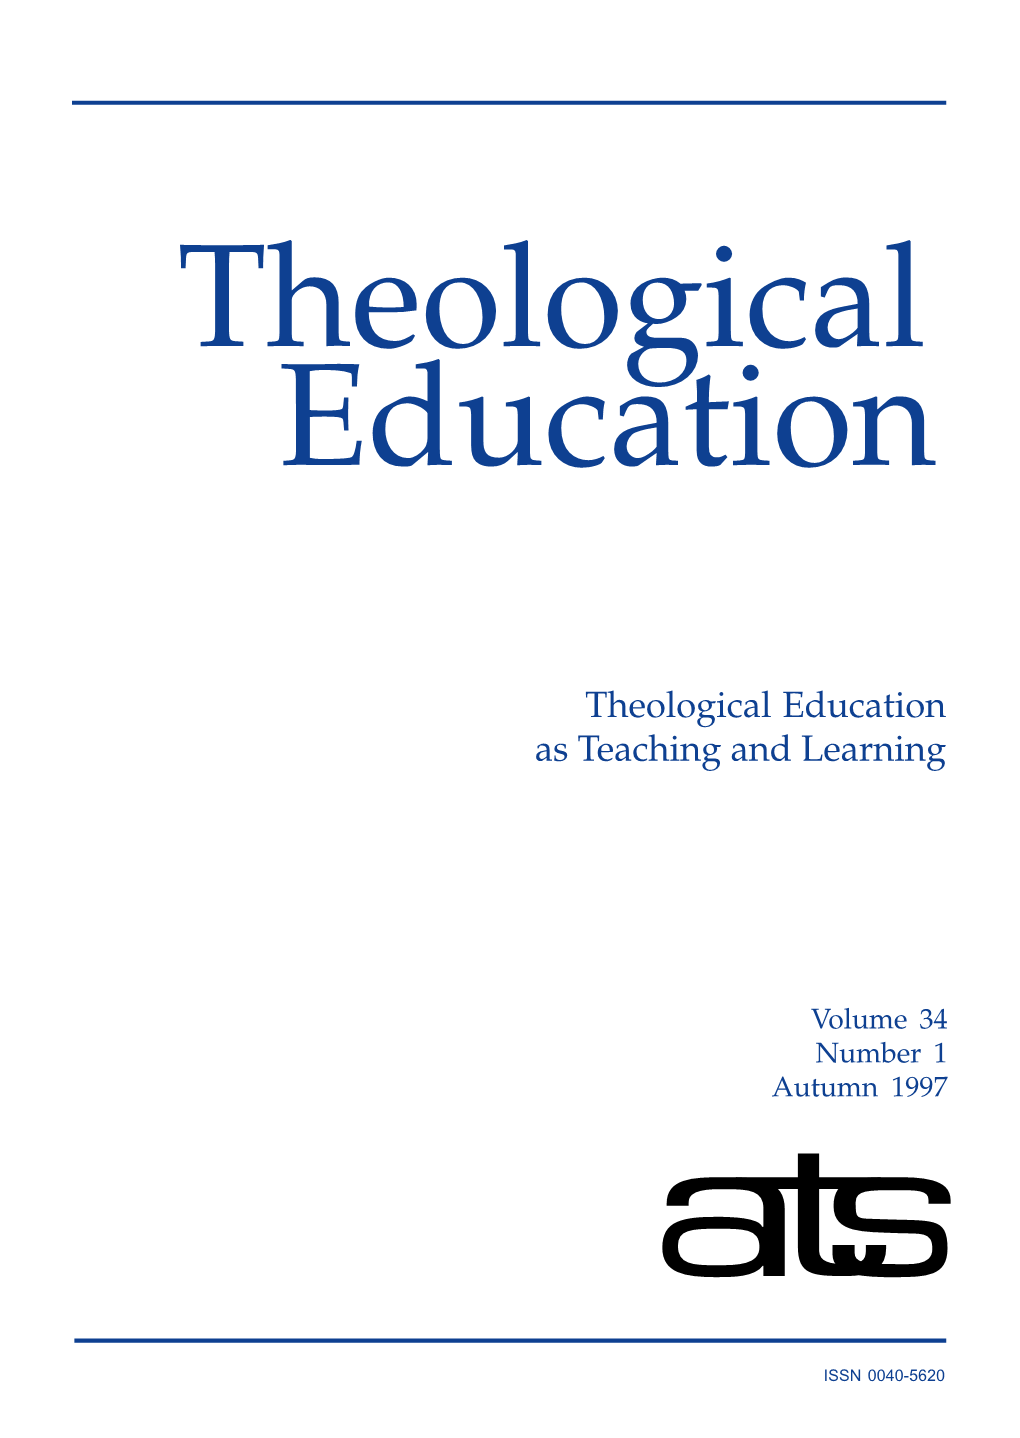 Theological Education As Teaching and Learning